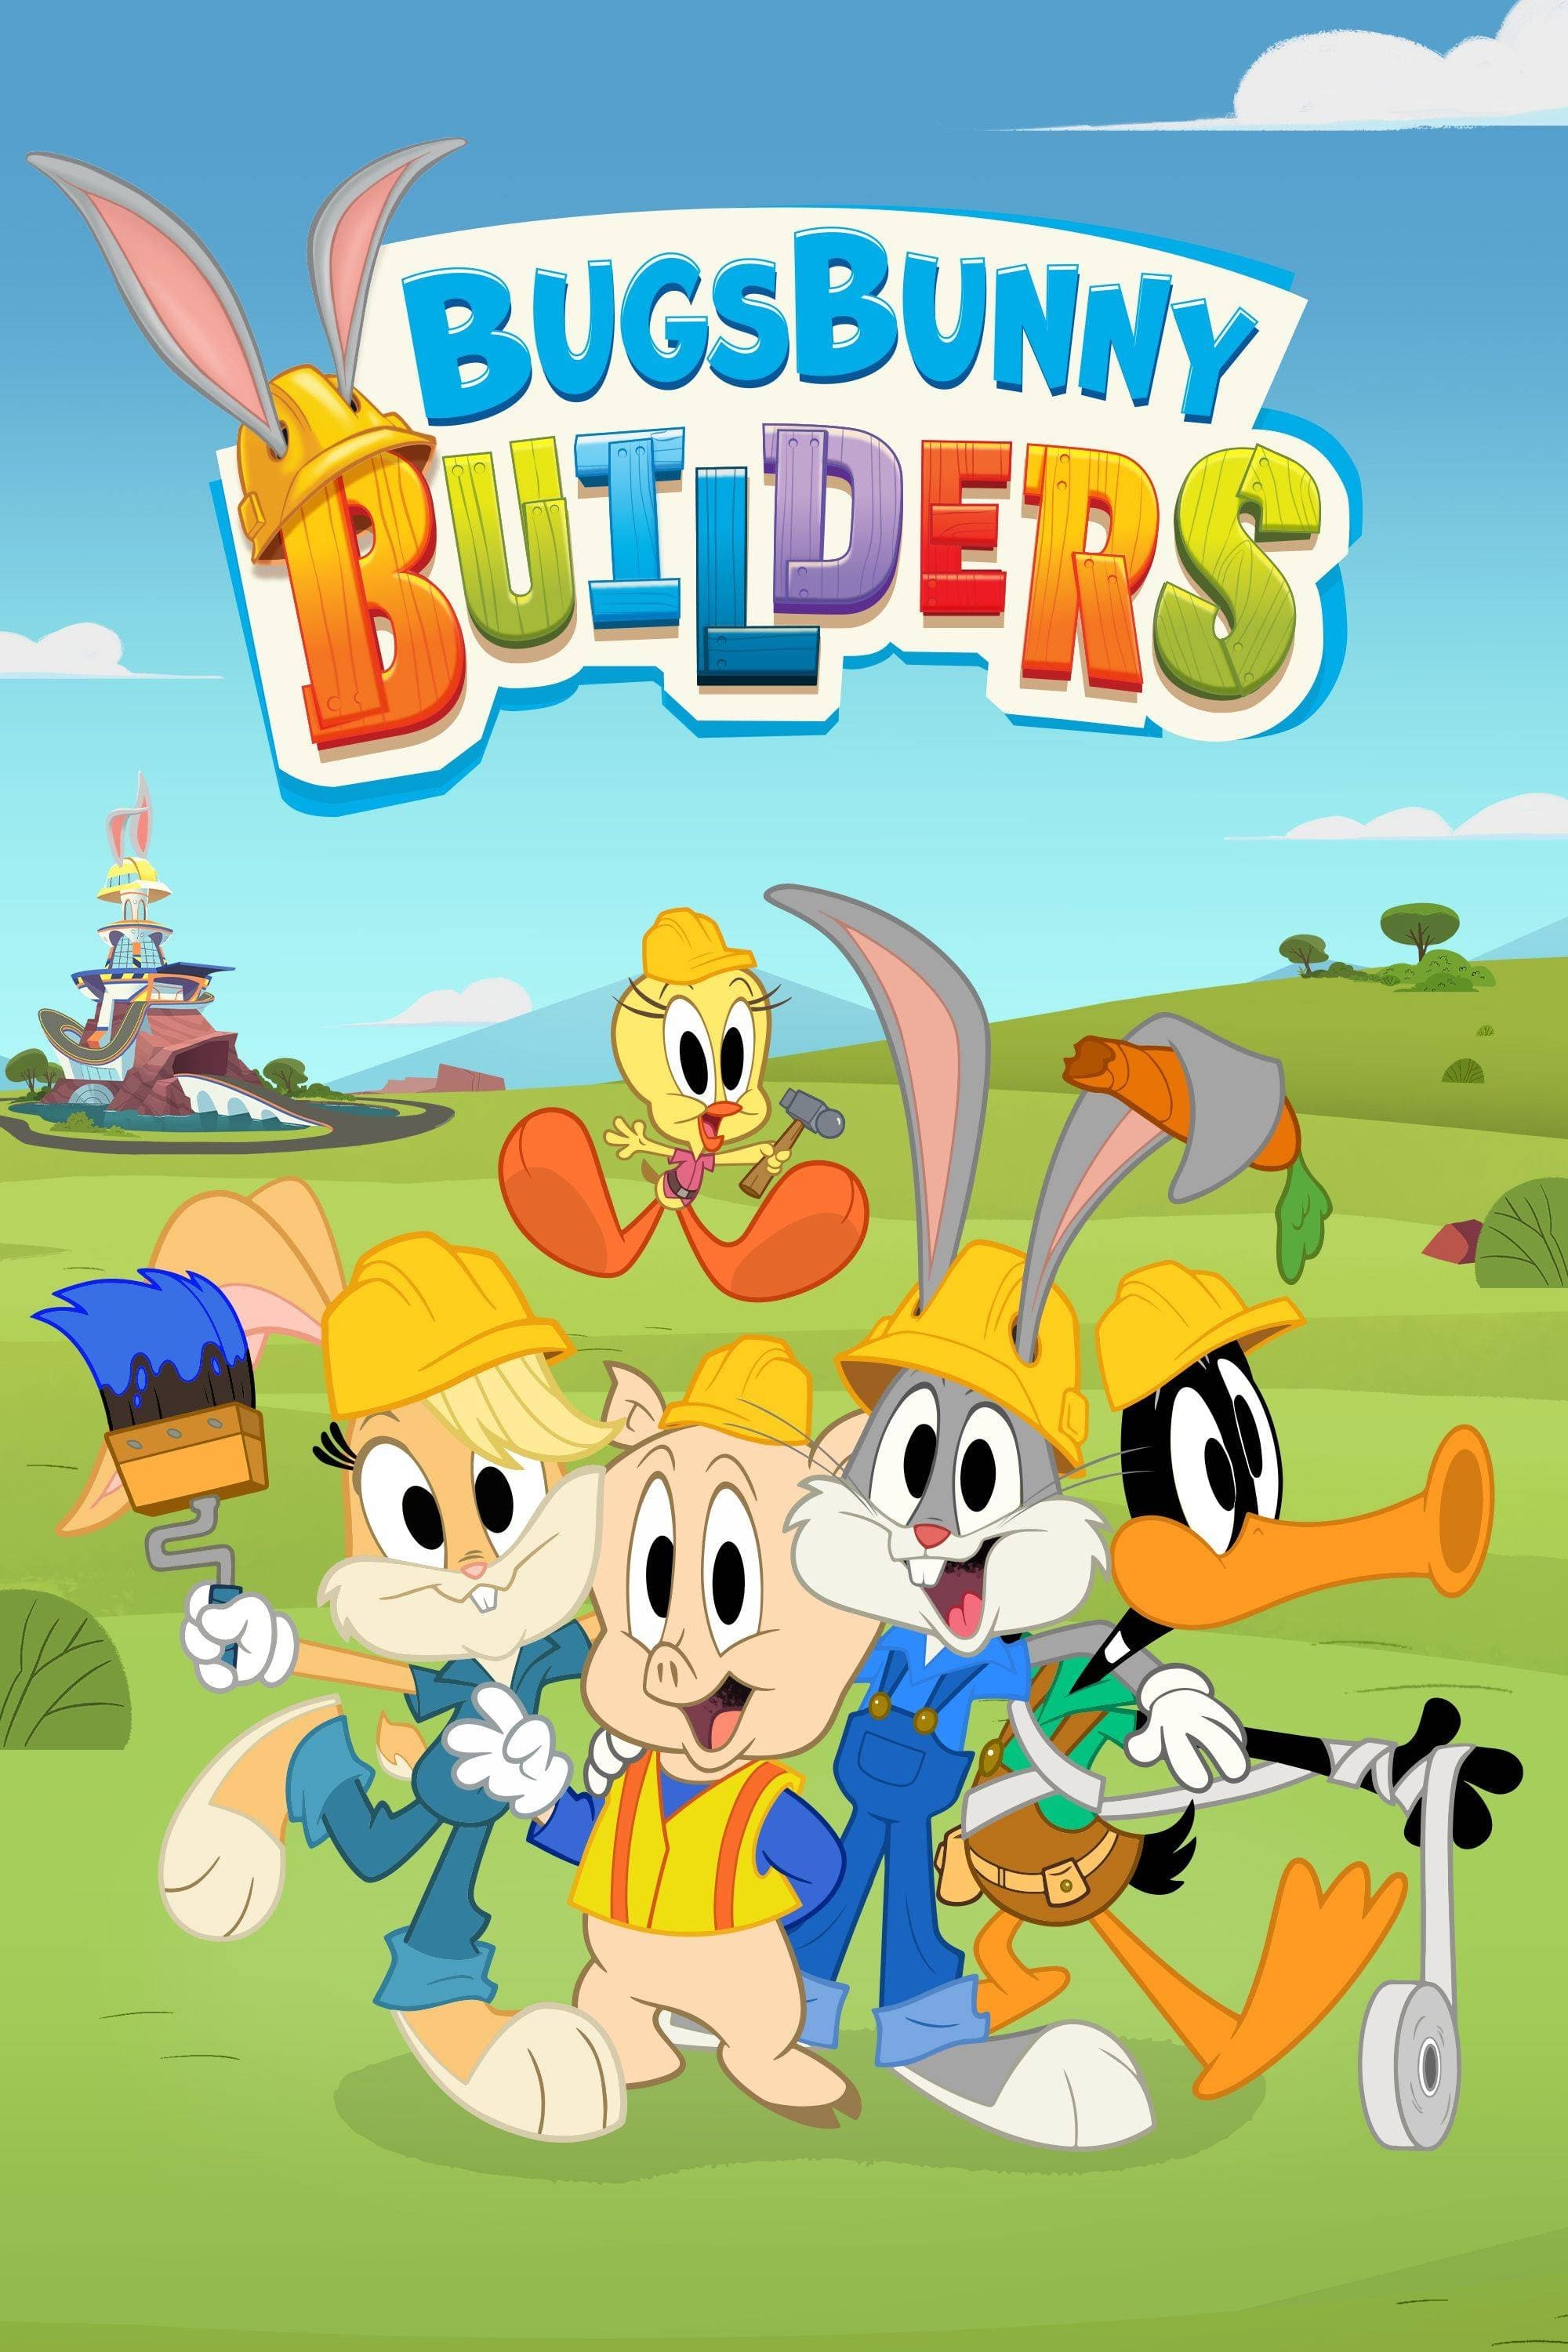 Bugs Bunny Builders TV Shows About Cartoon